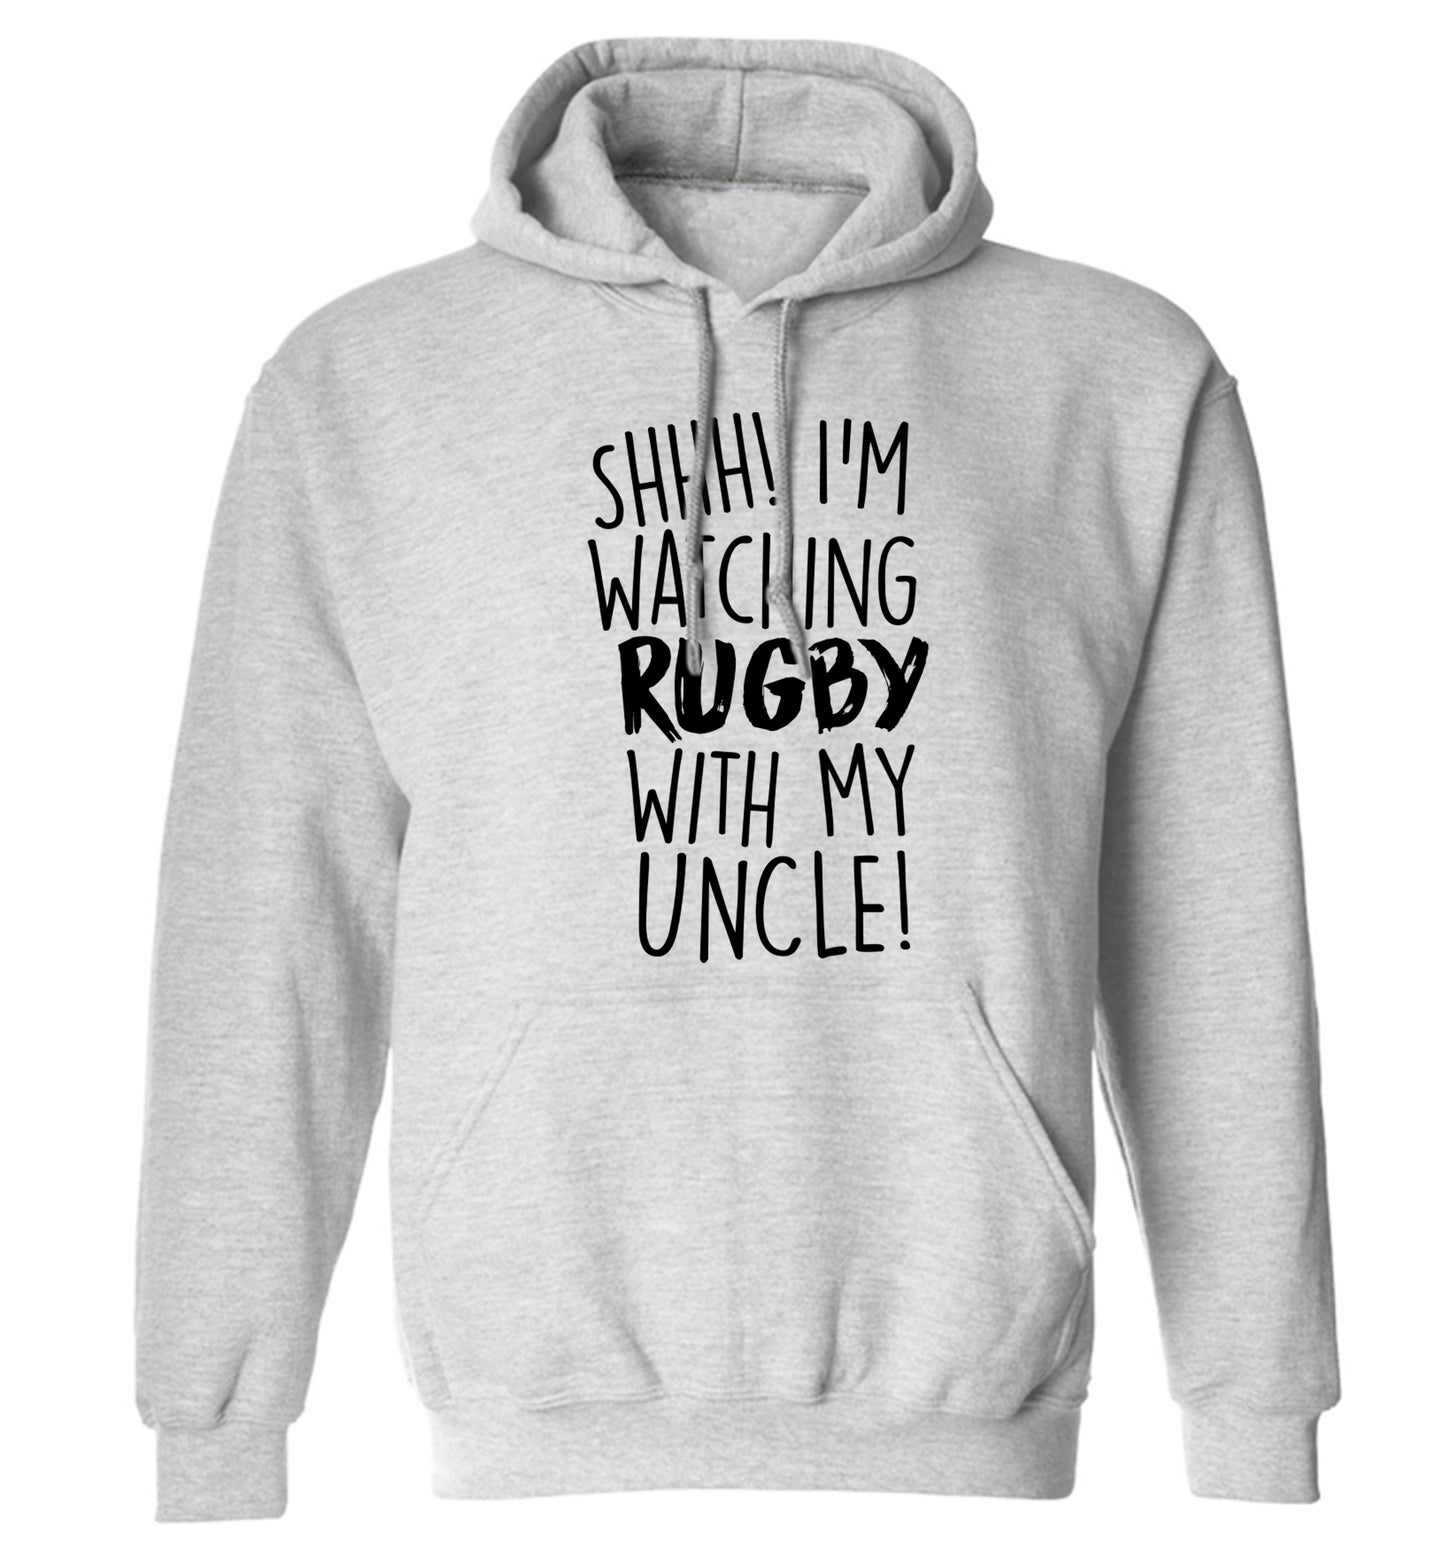 Shh.. I'm watching rugby with my uncle adults unisex grey hoodie 2XL